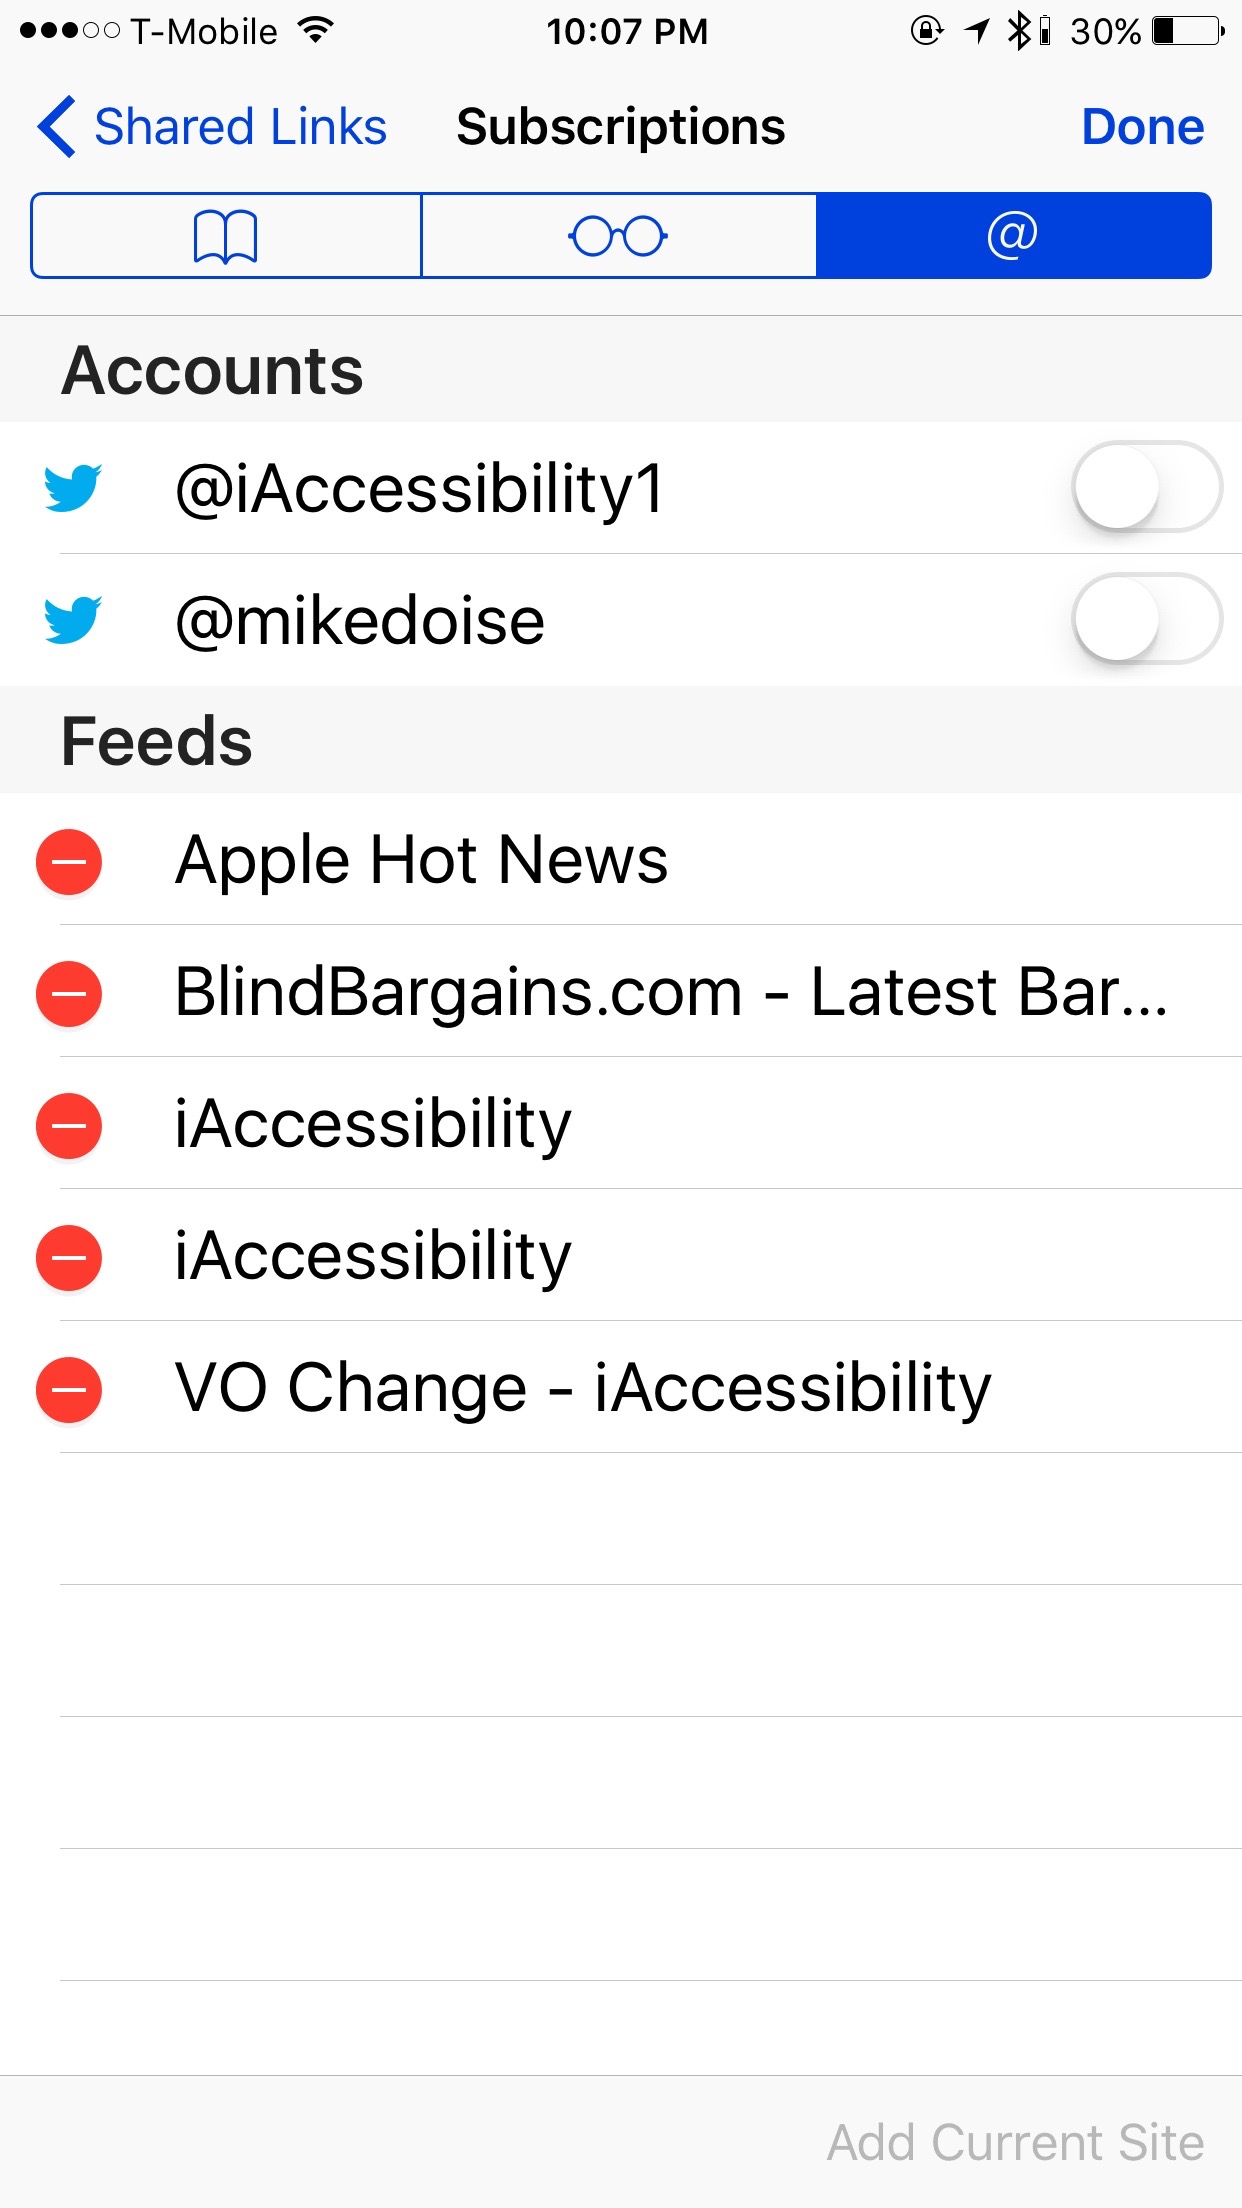 Subscriptions screen in iOS